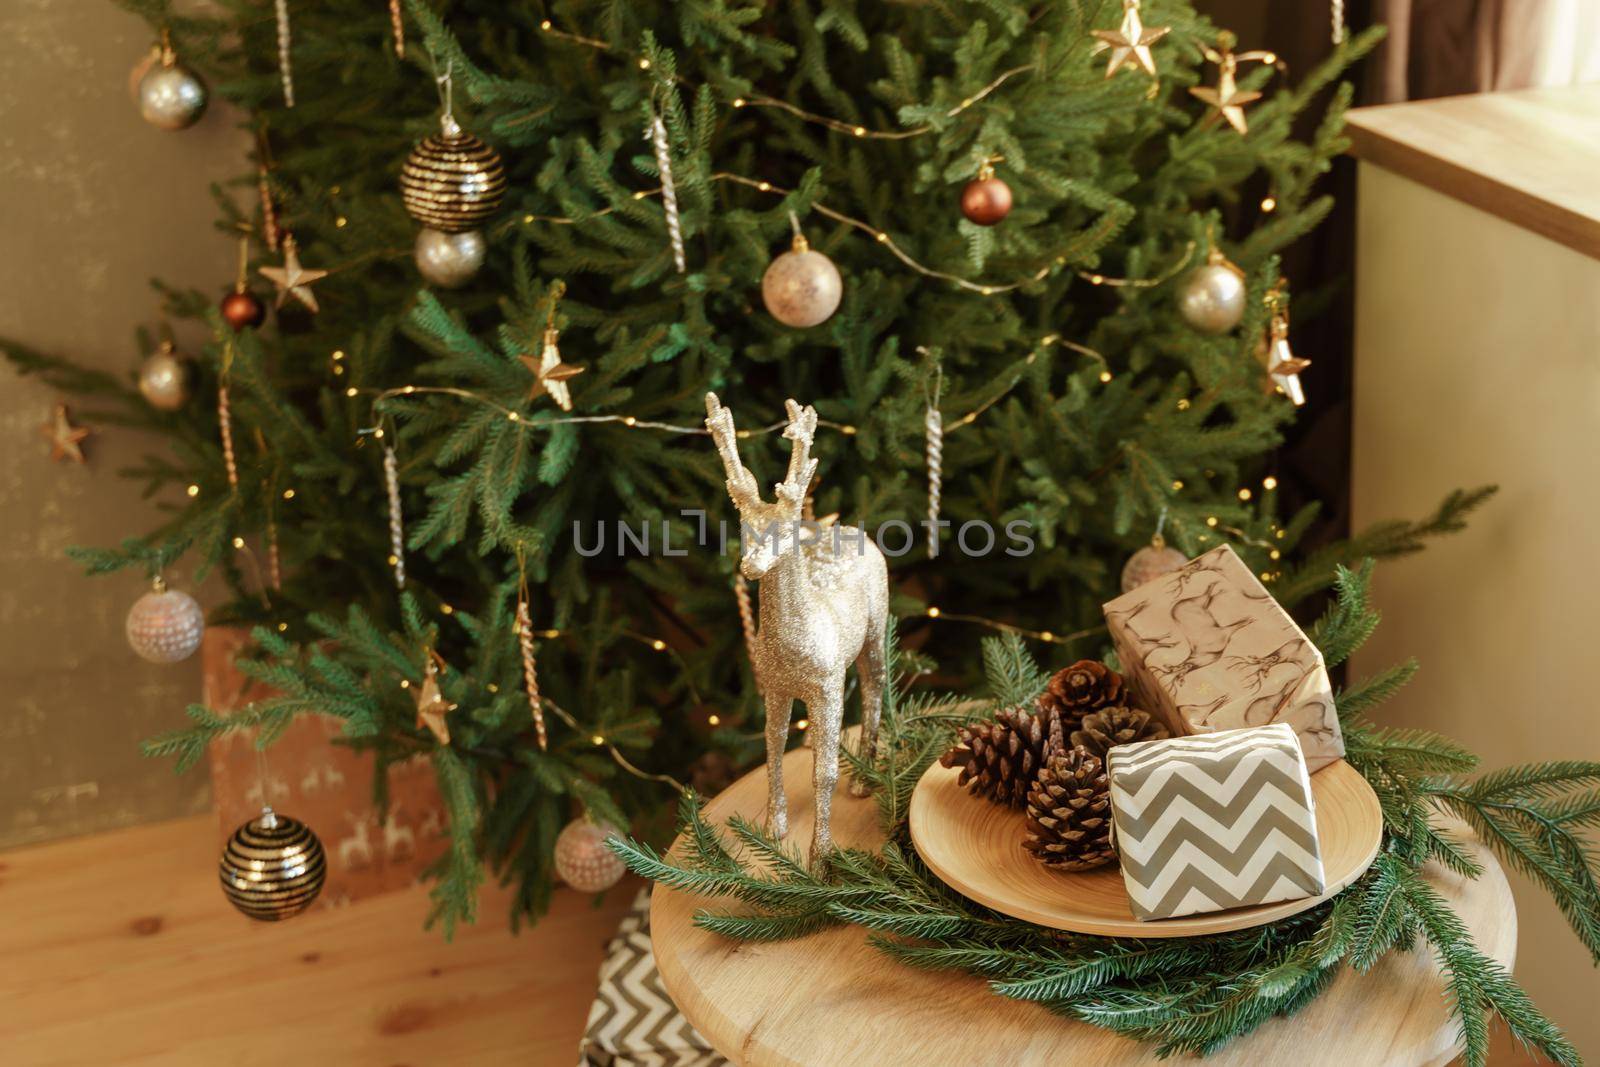 Presents and Gifts under Christmas Tree, Winter Holiday Concept.